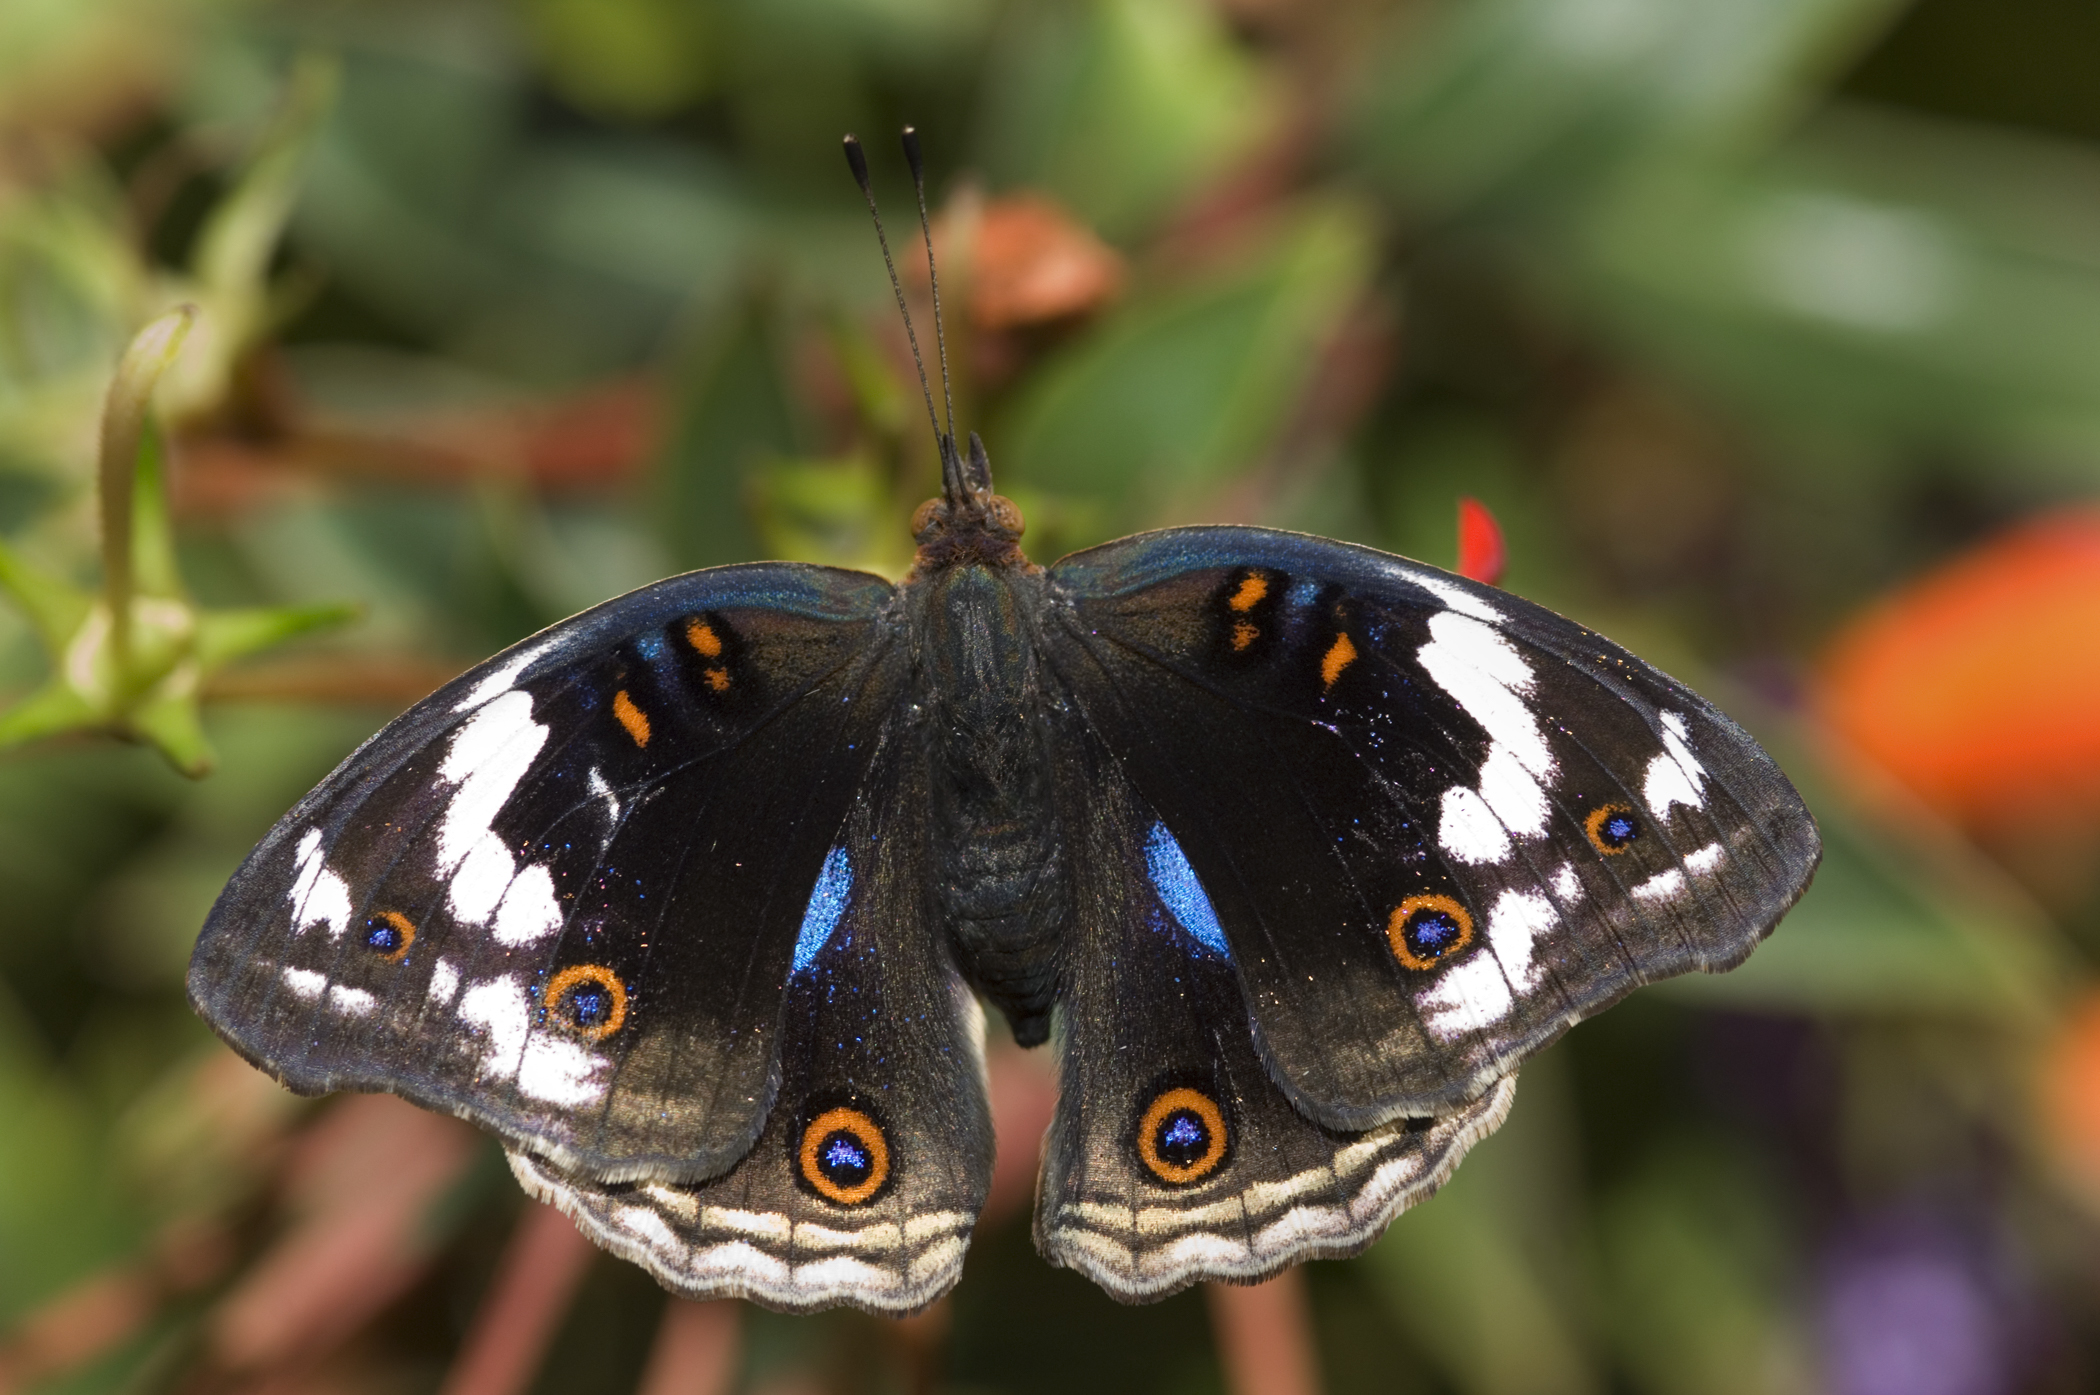 Family tree of 'boring' butterflies reveals they're anything but